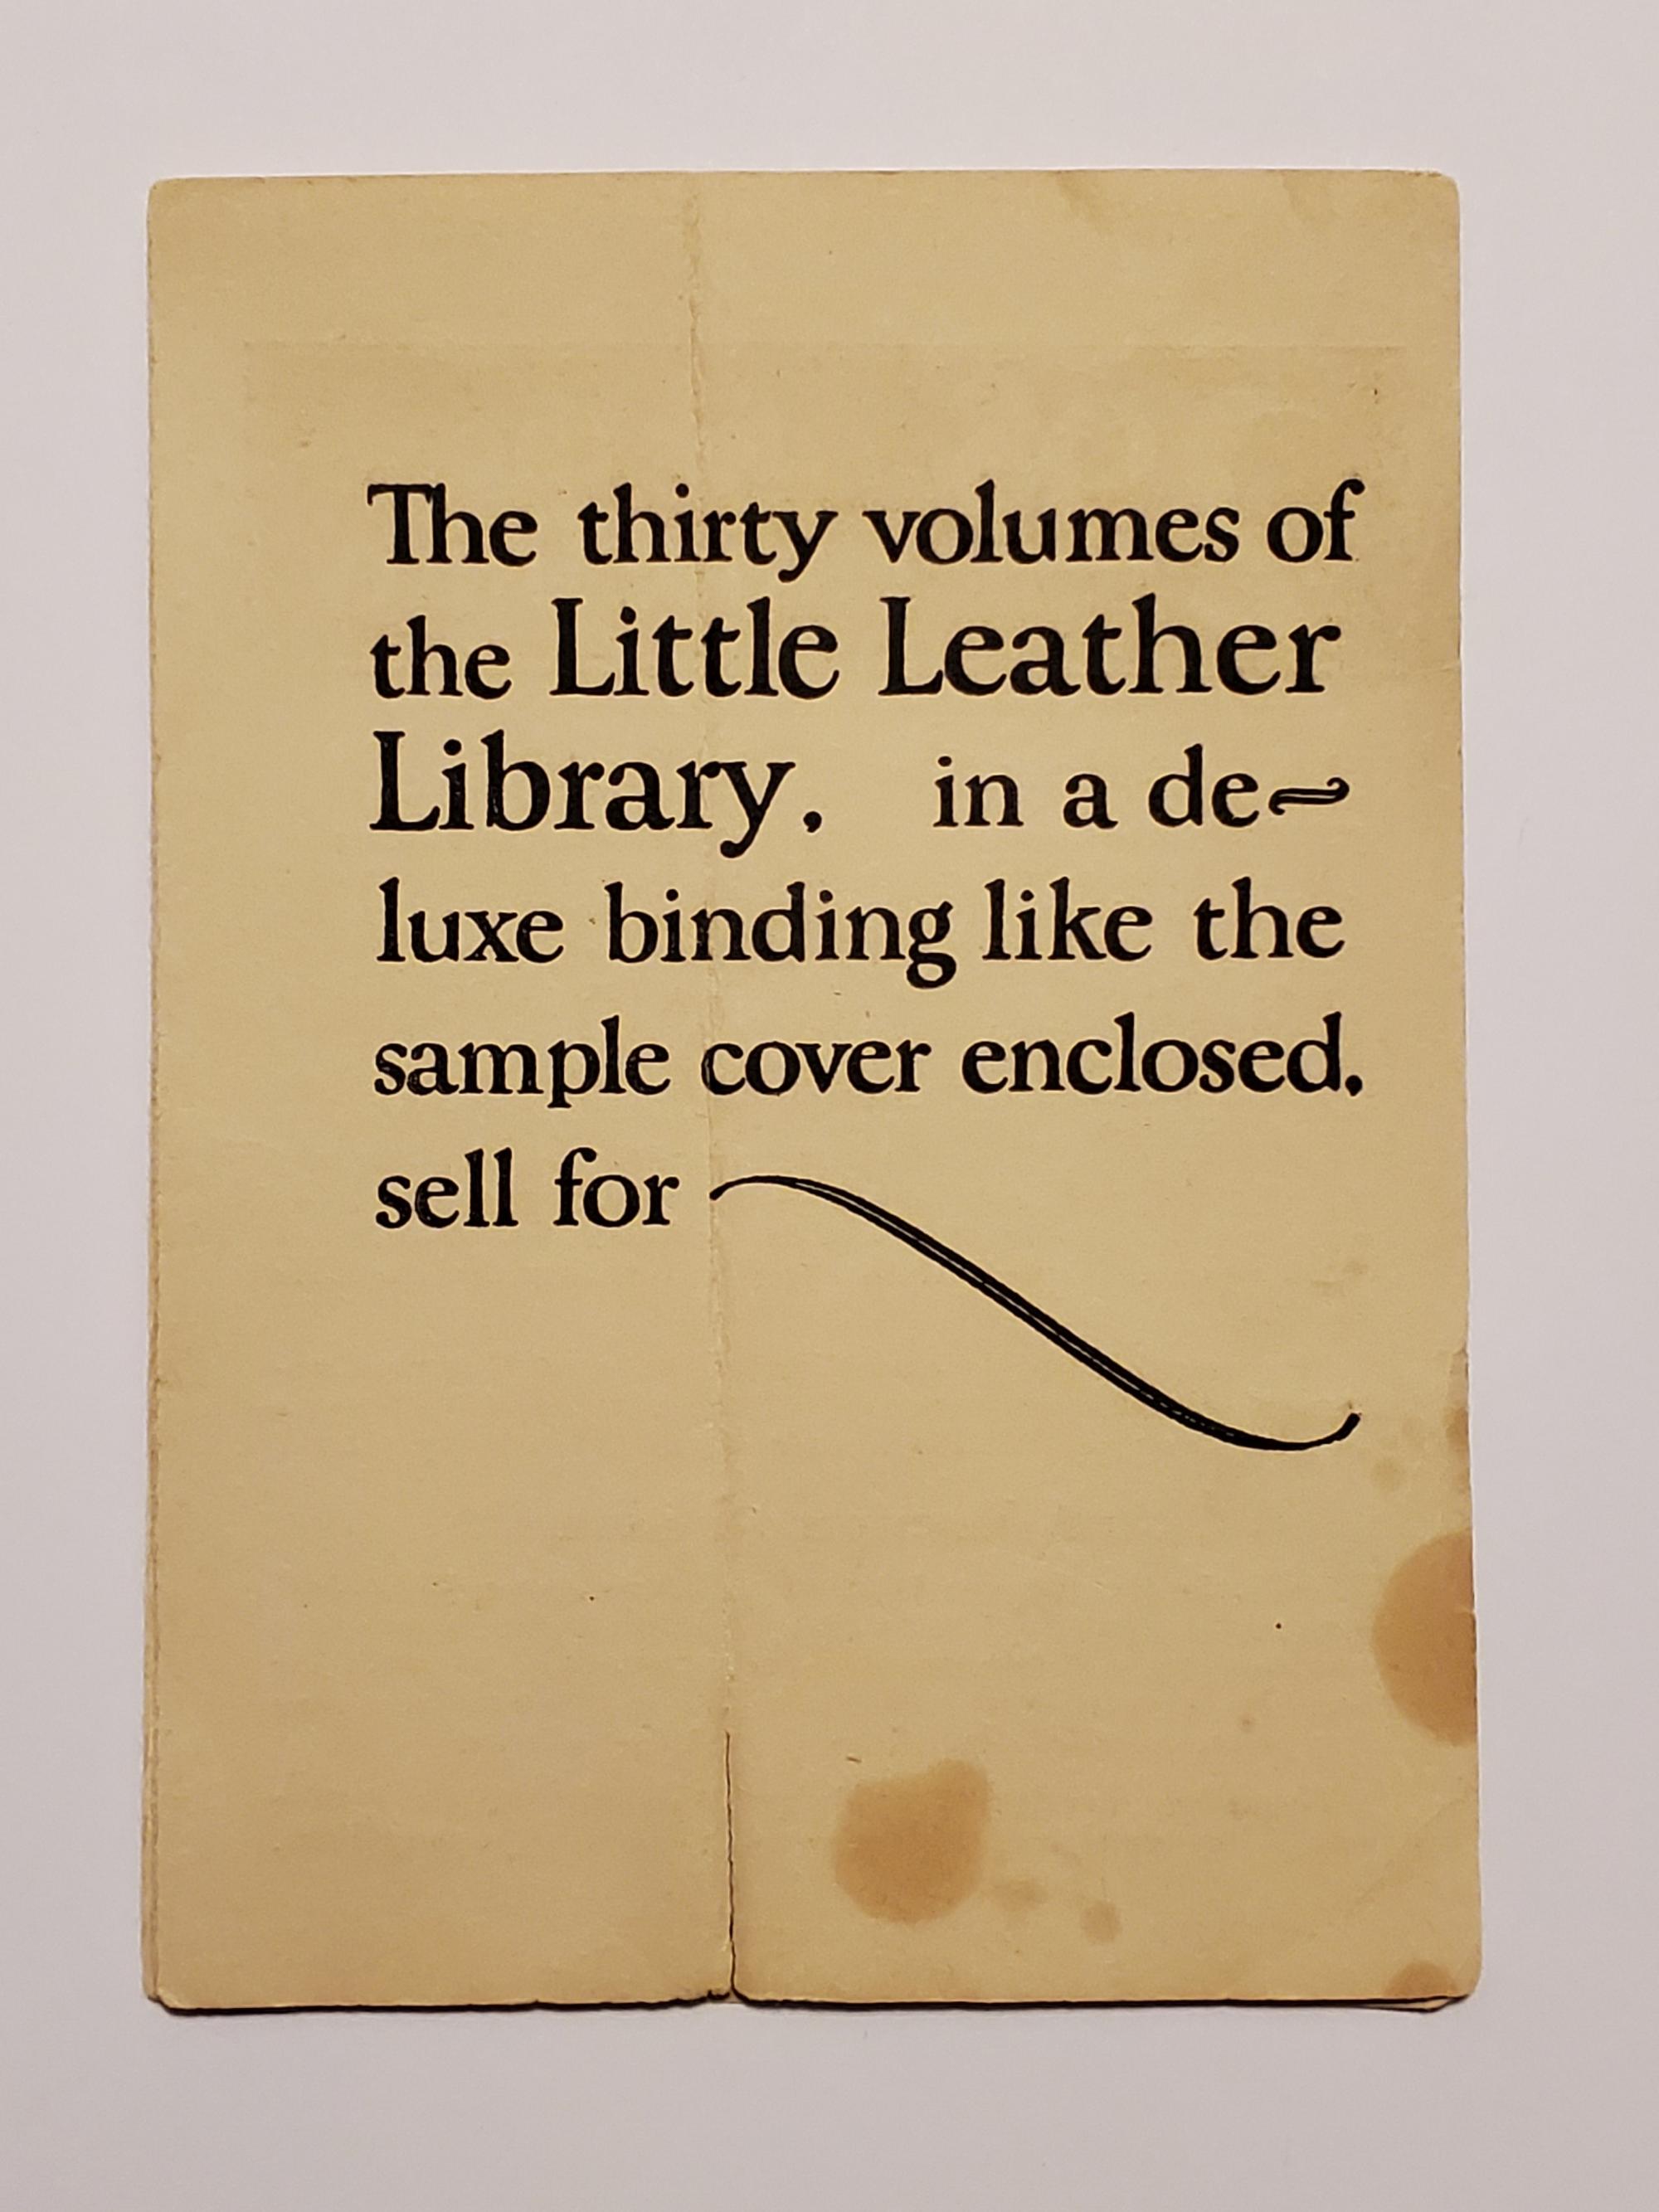 an old sheet of paper, heavily yellowed, that reads "The thirty volumes of the Little Leather Library, in a deluxe binding like the same cover enclosed, sell for ~"